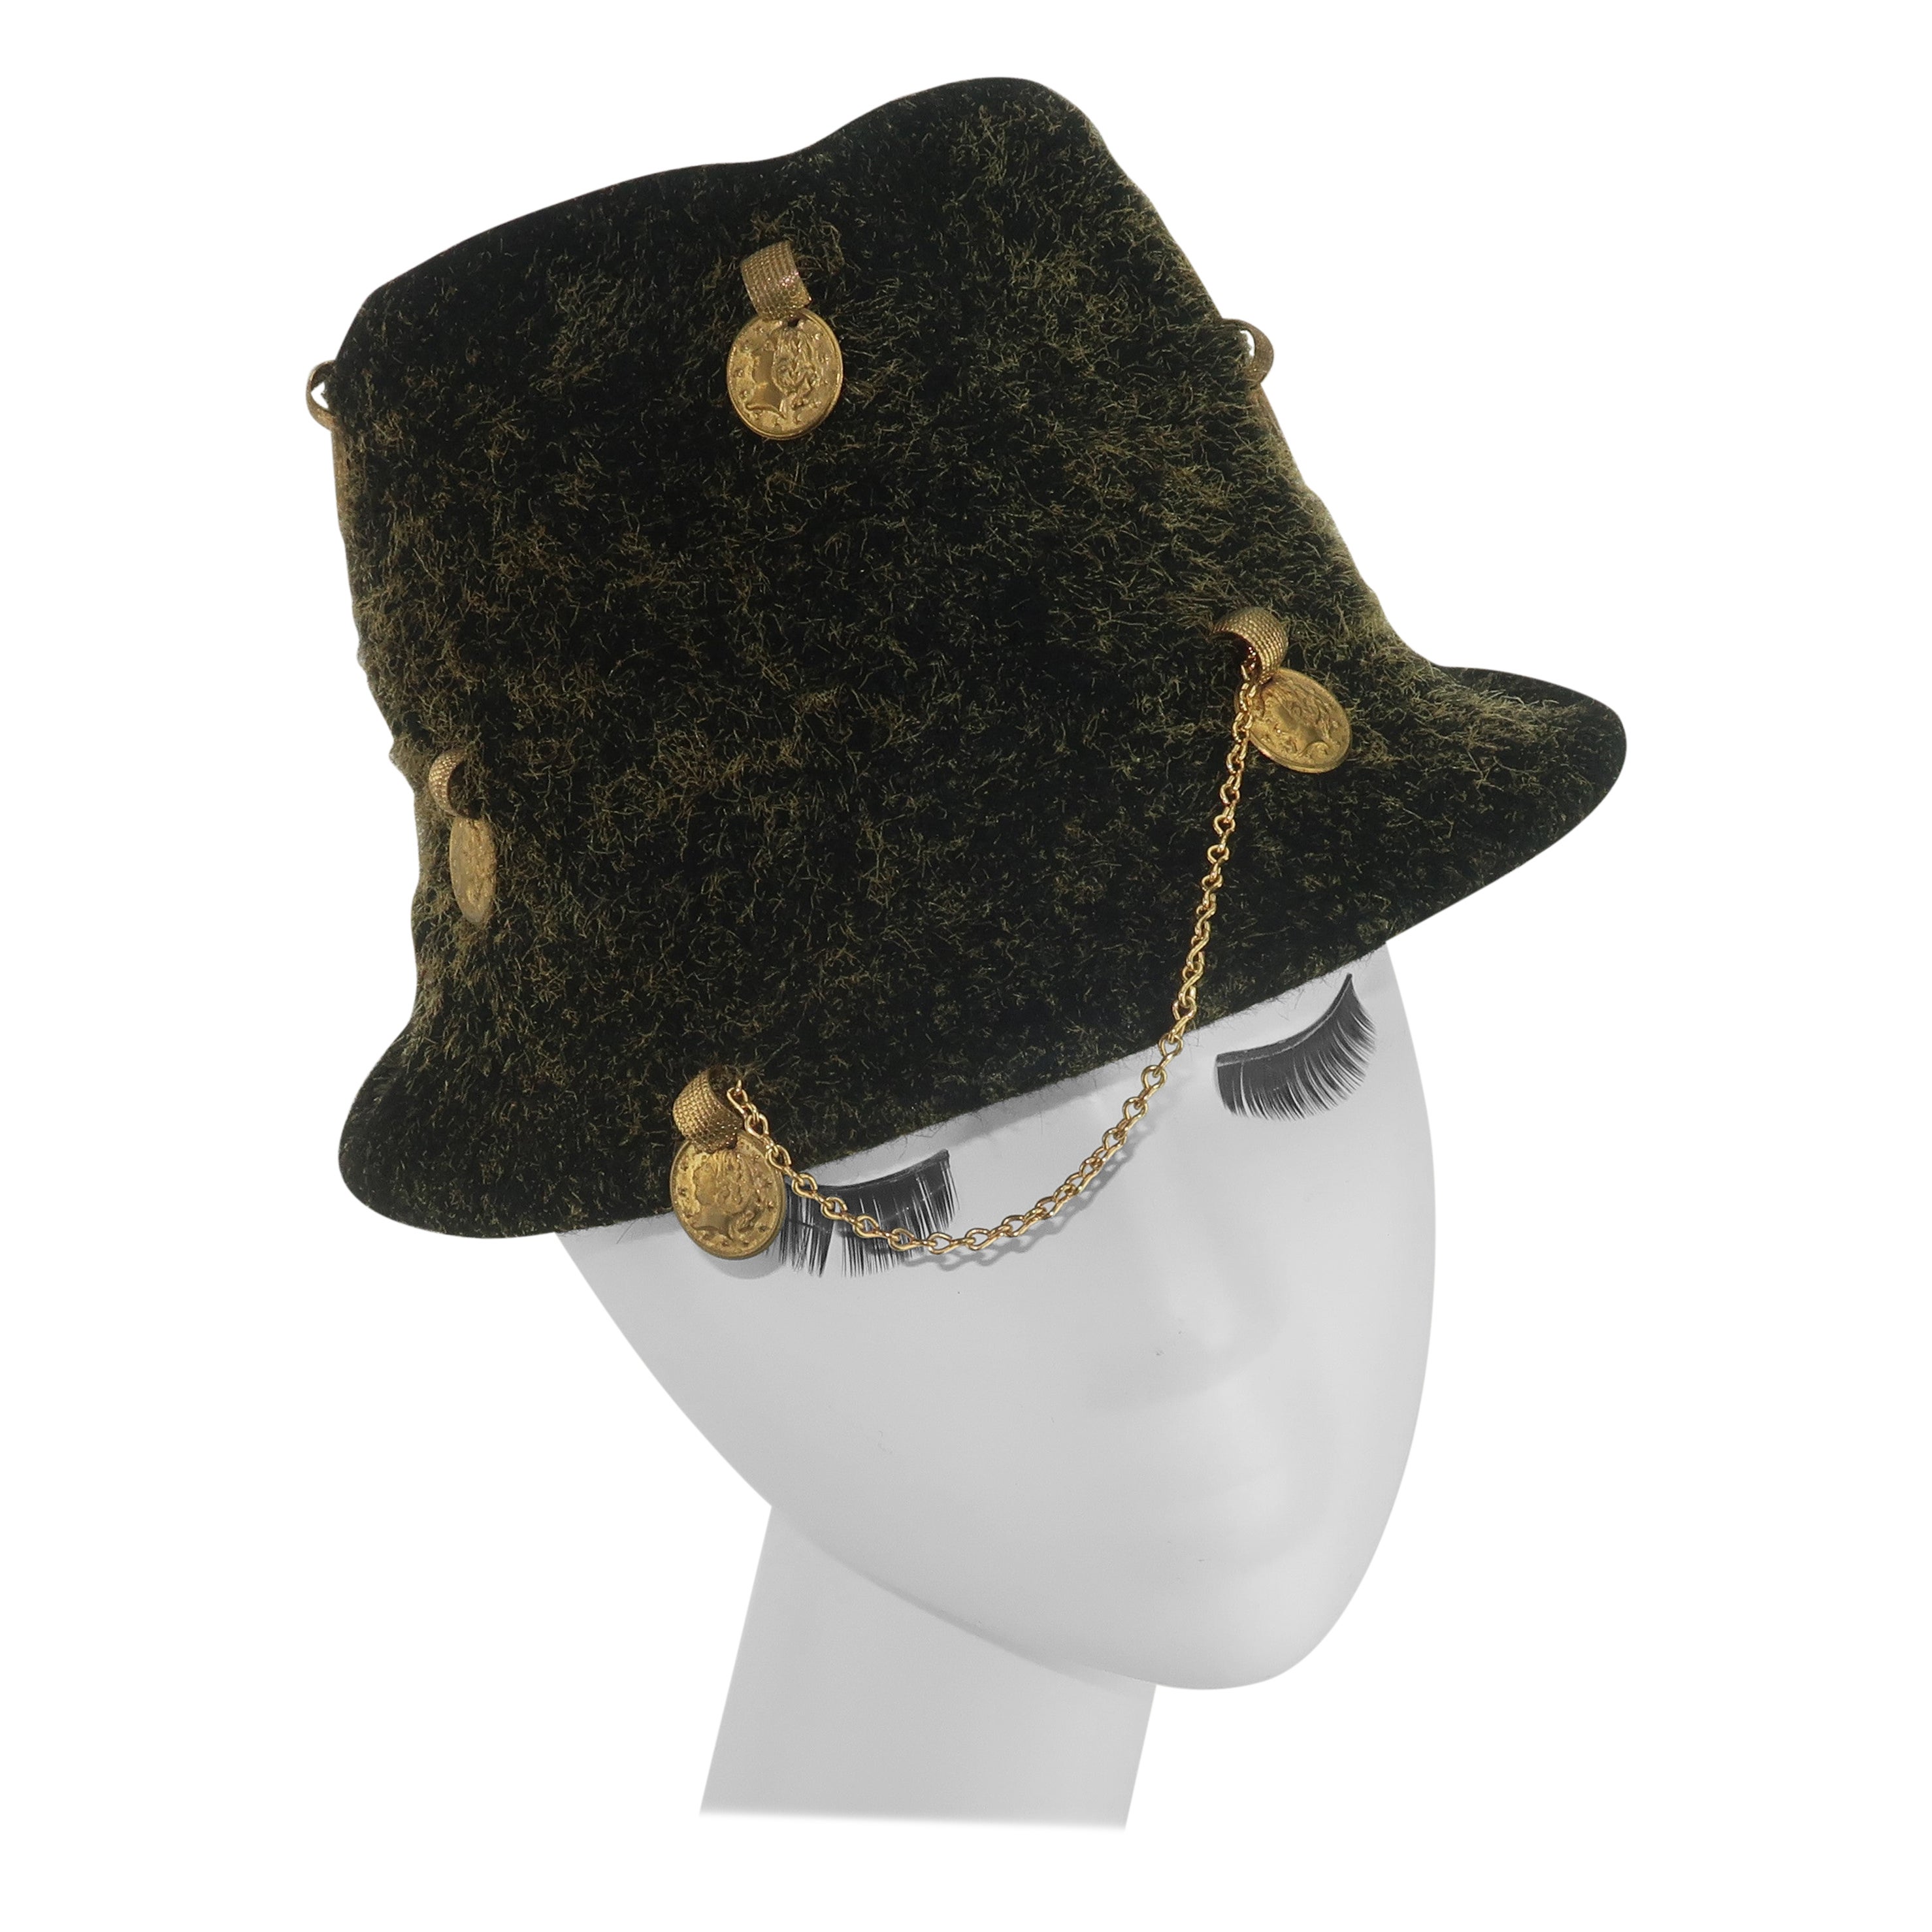 Yves Saint Laurent Charcoal Gray Trilby Hat With Gold Coins, 1960's